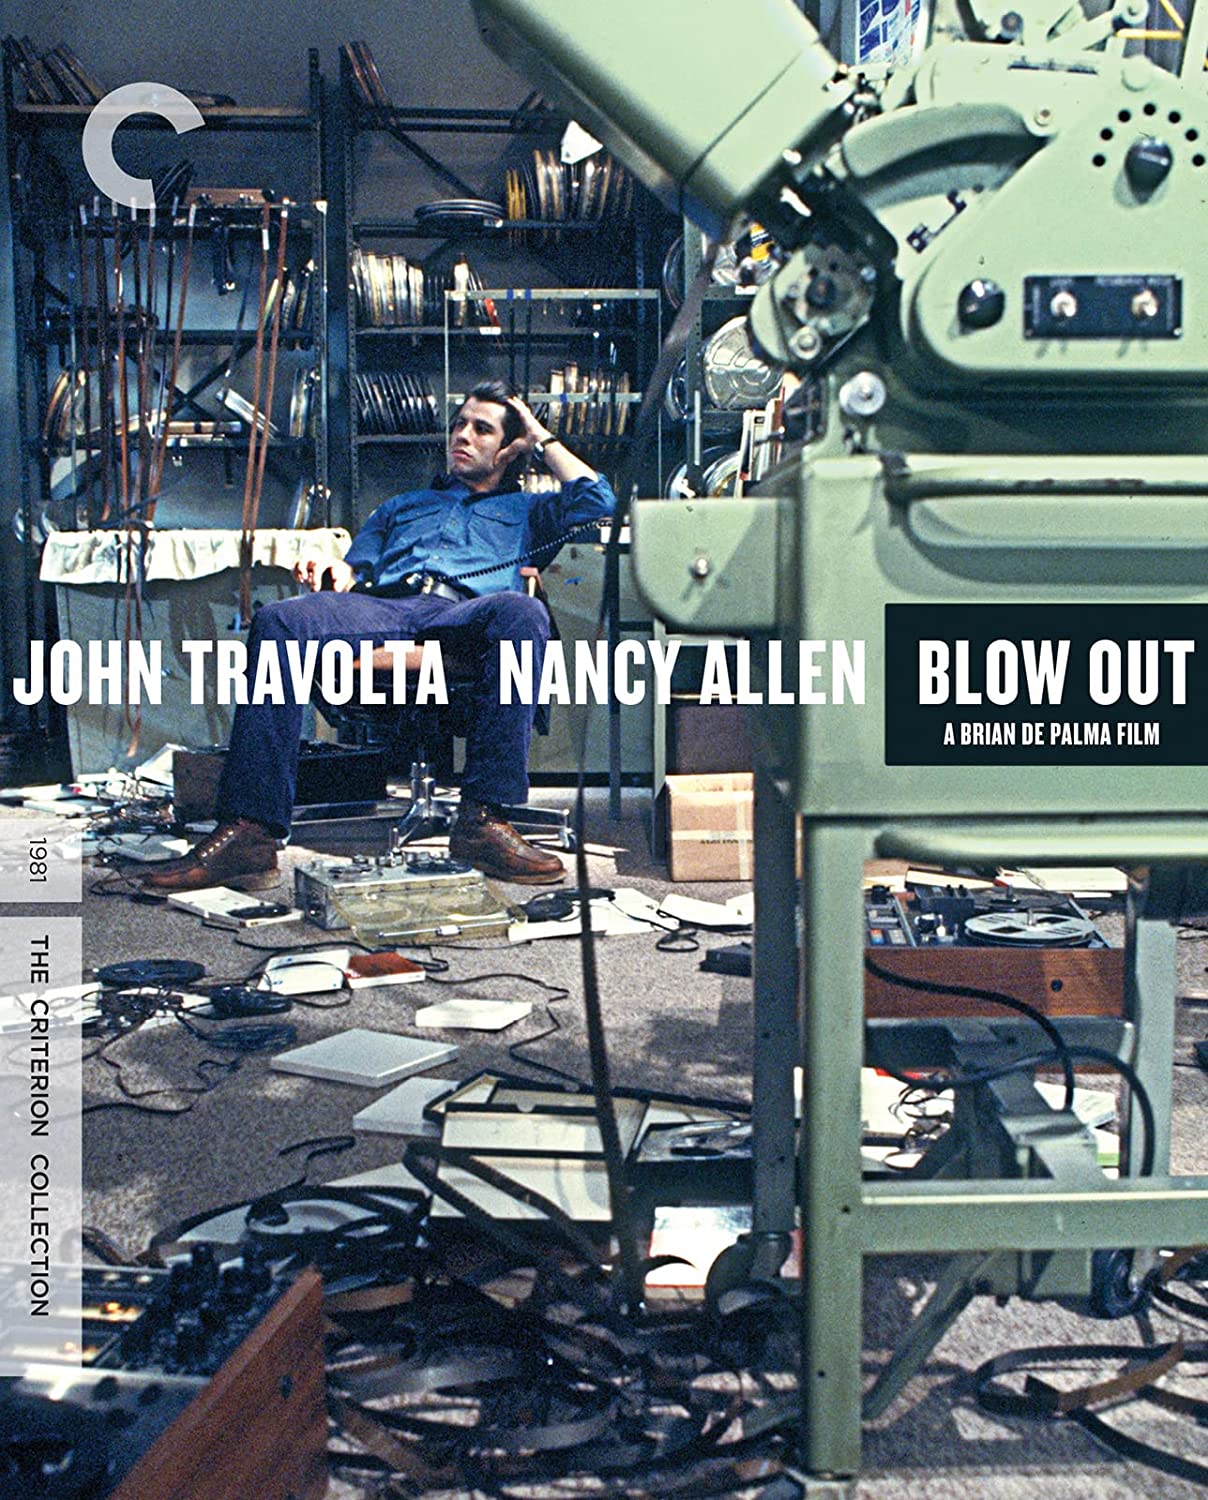 Blow Out 1981 4k Blu-ray Criterion Collection